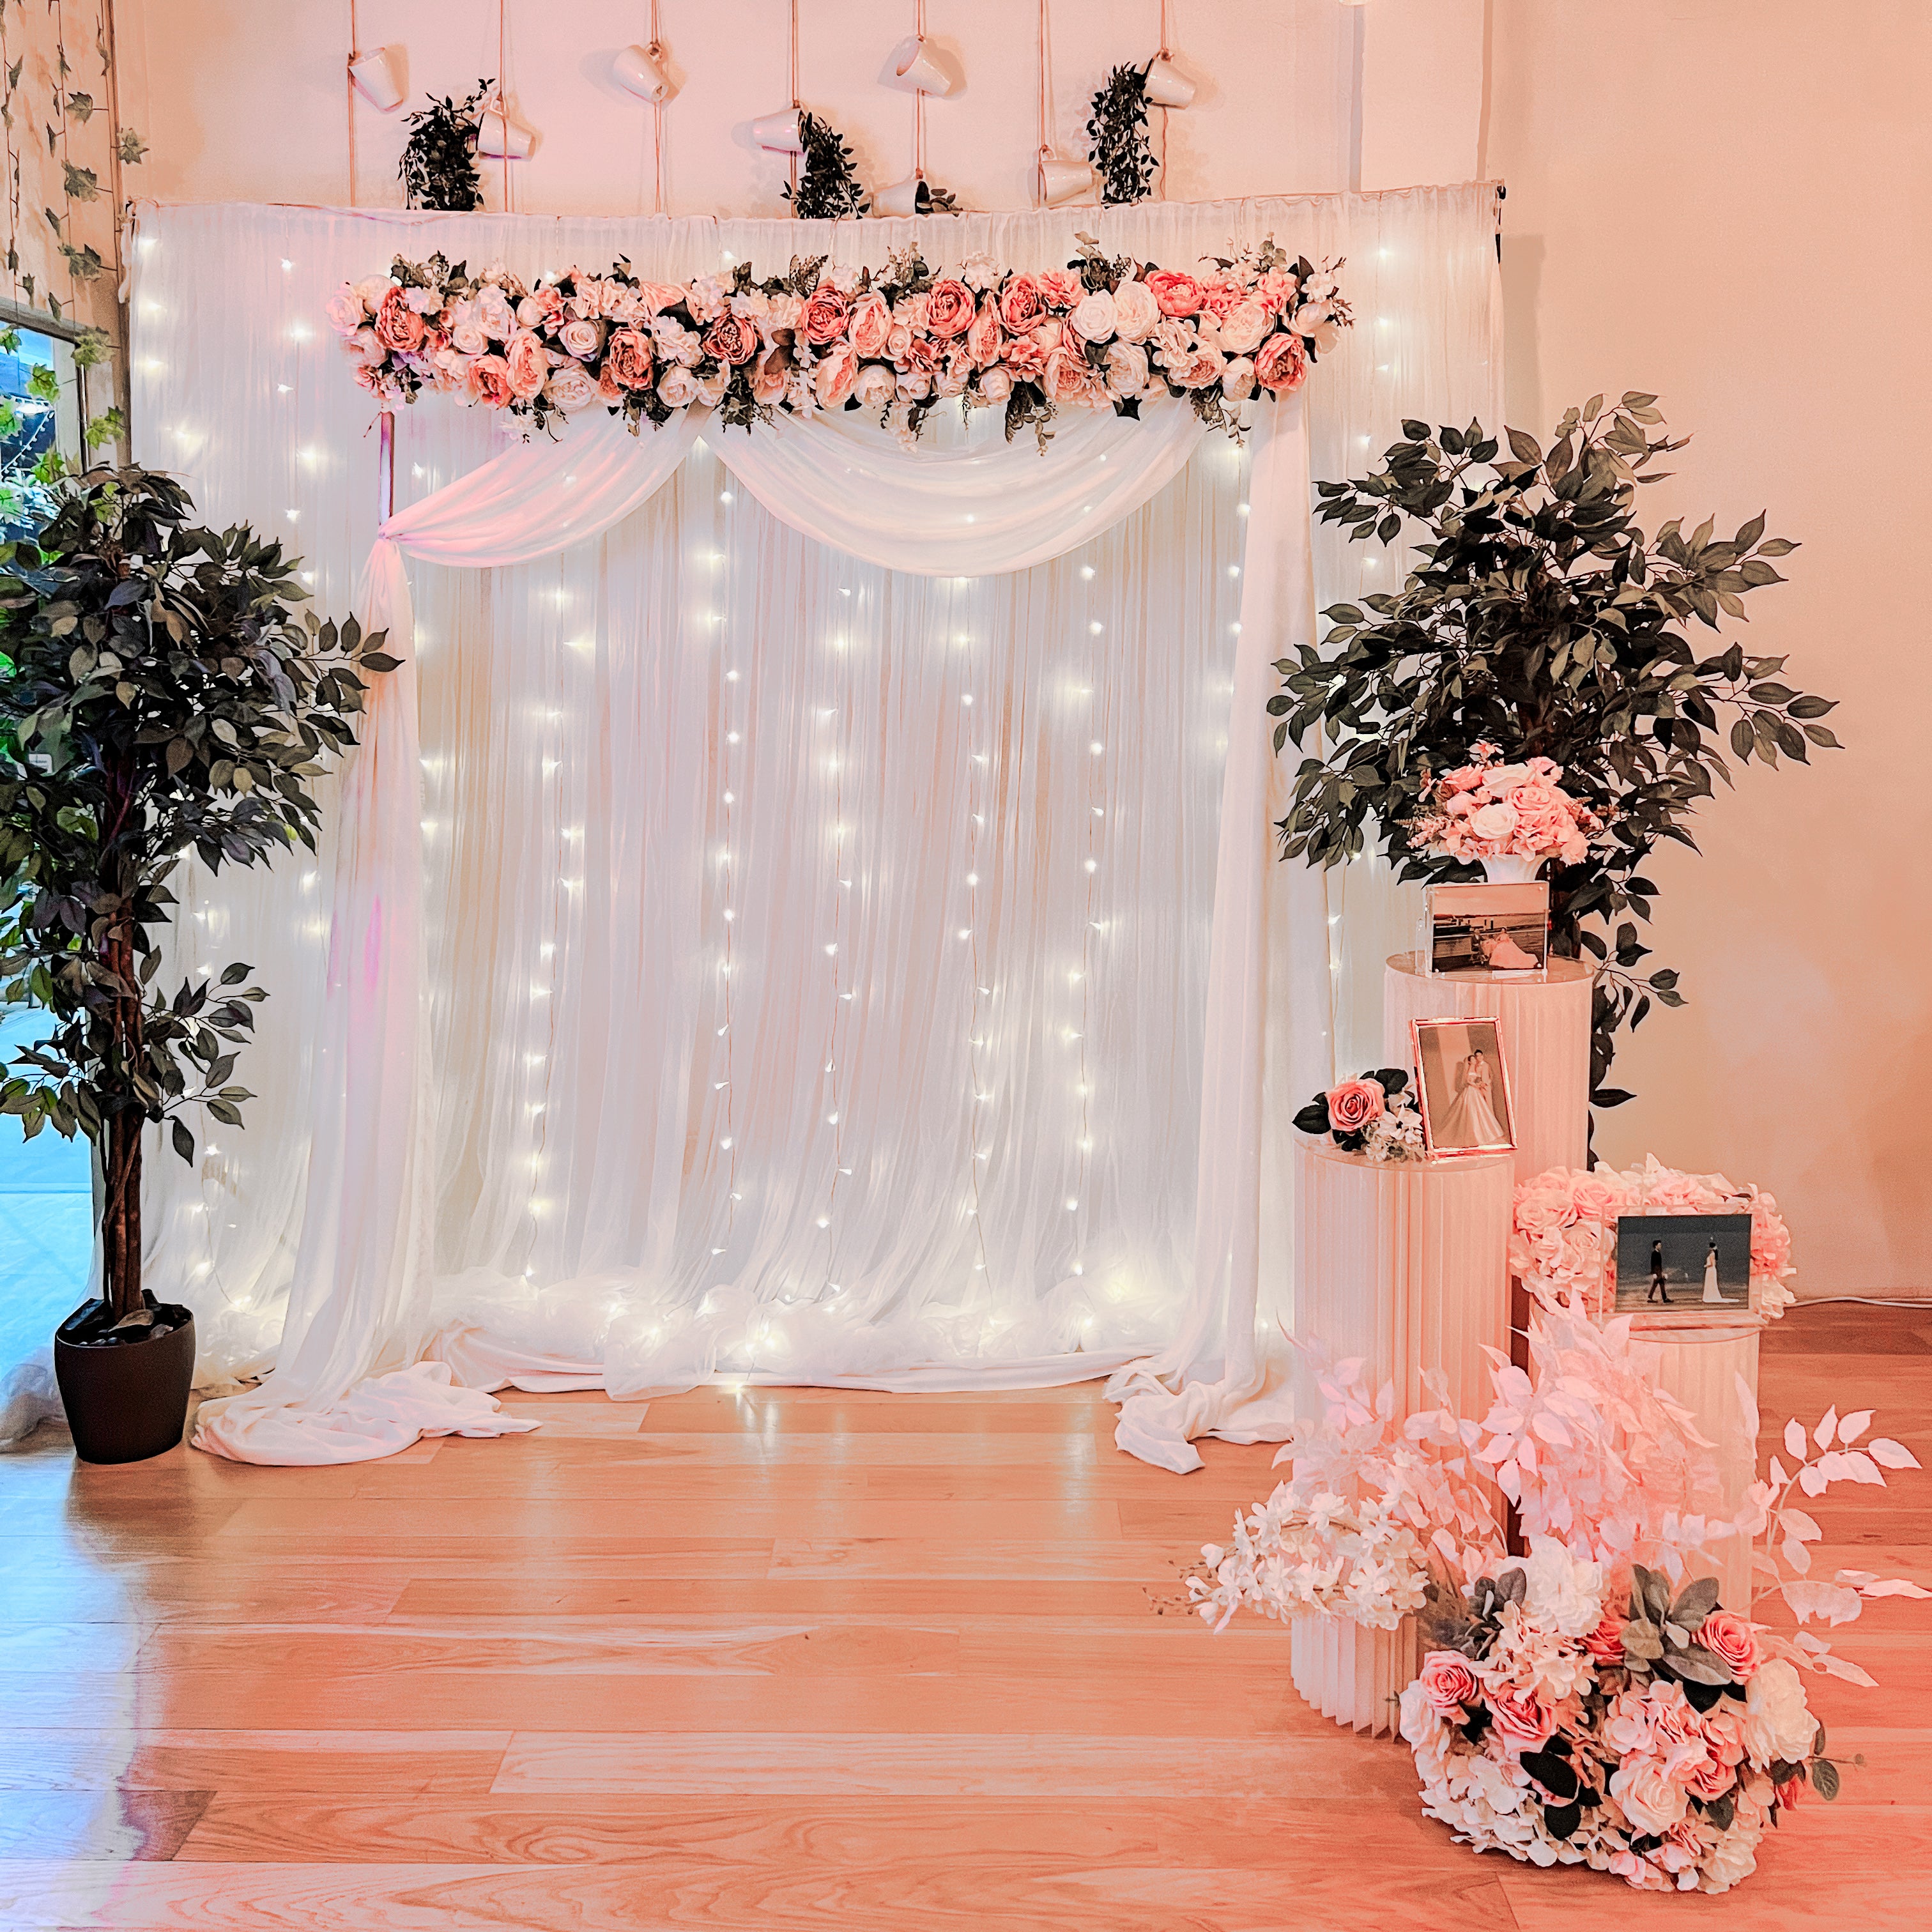 Affordable Wedding/ Solemnisation Decor in Singapore -Pink White Peach Floral Arch with Fairy-lights Backdrop and Photo Stands (Venue: Into The Woods Cafe)